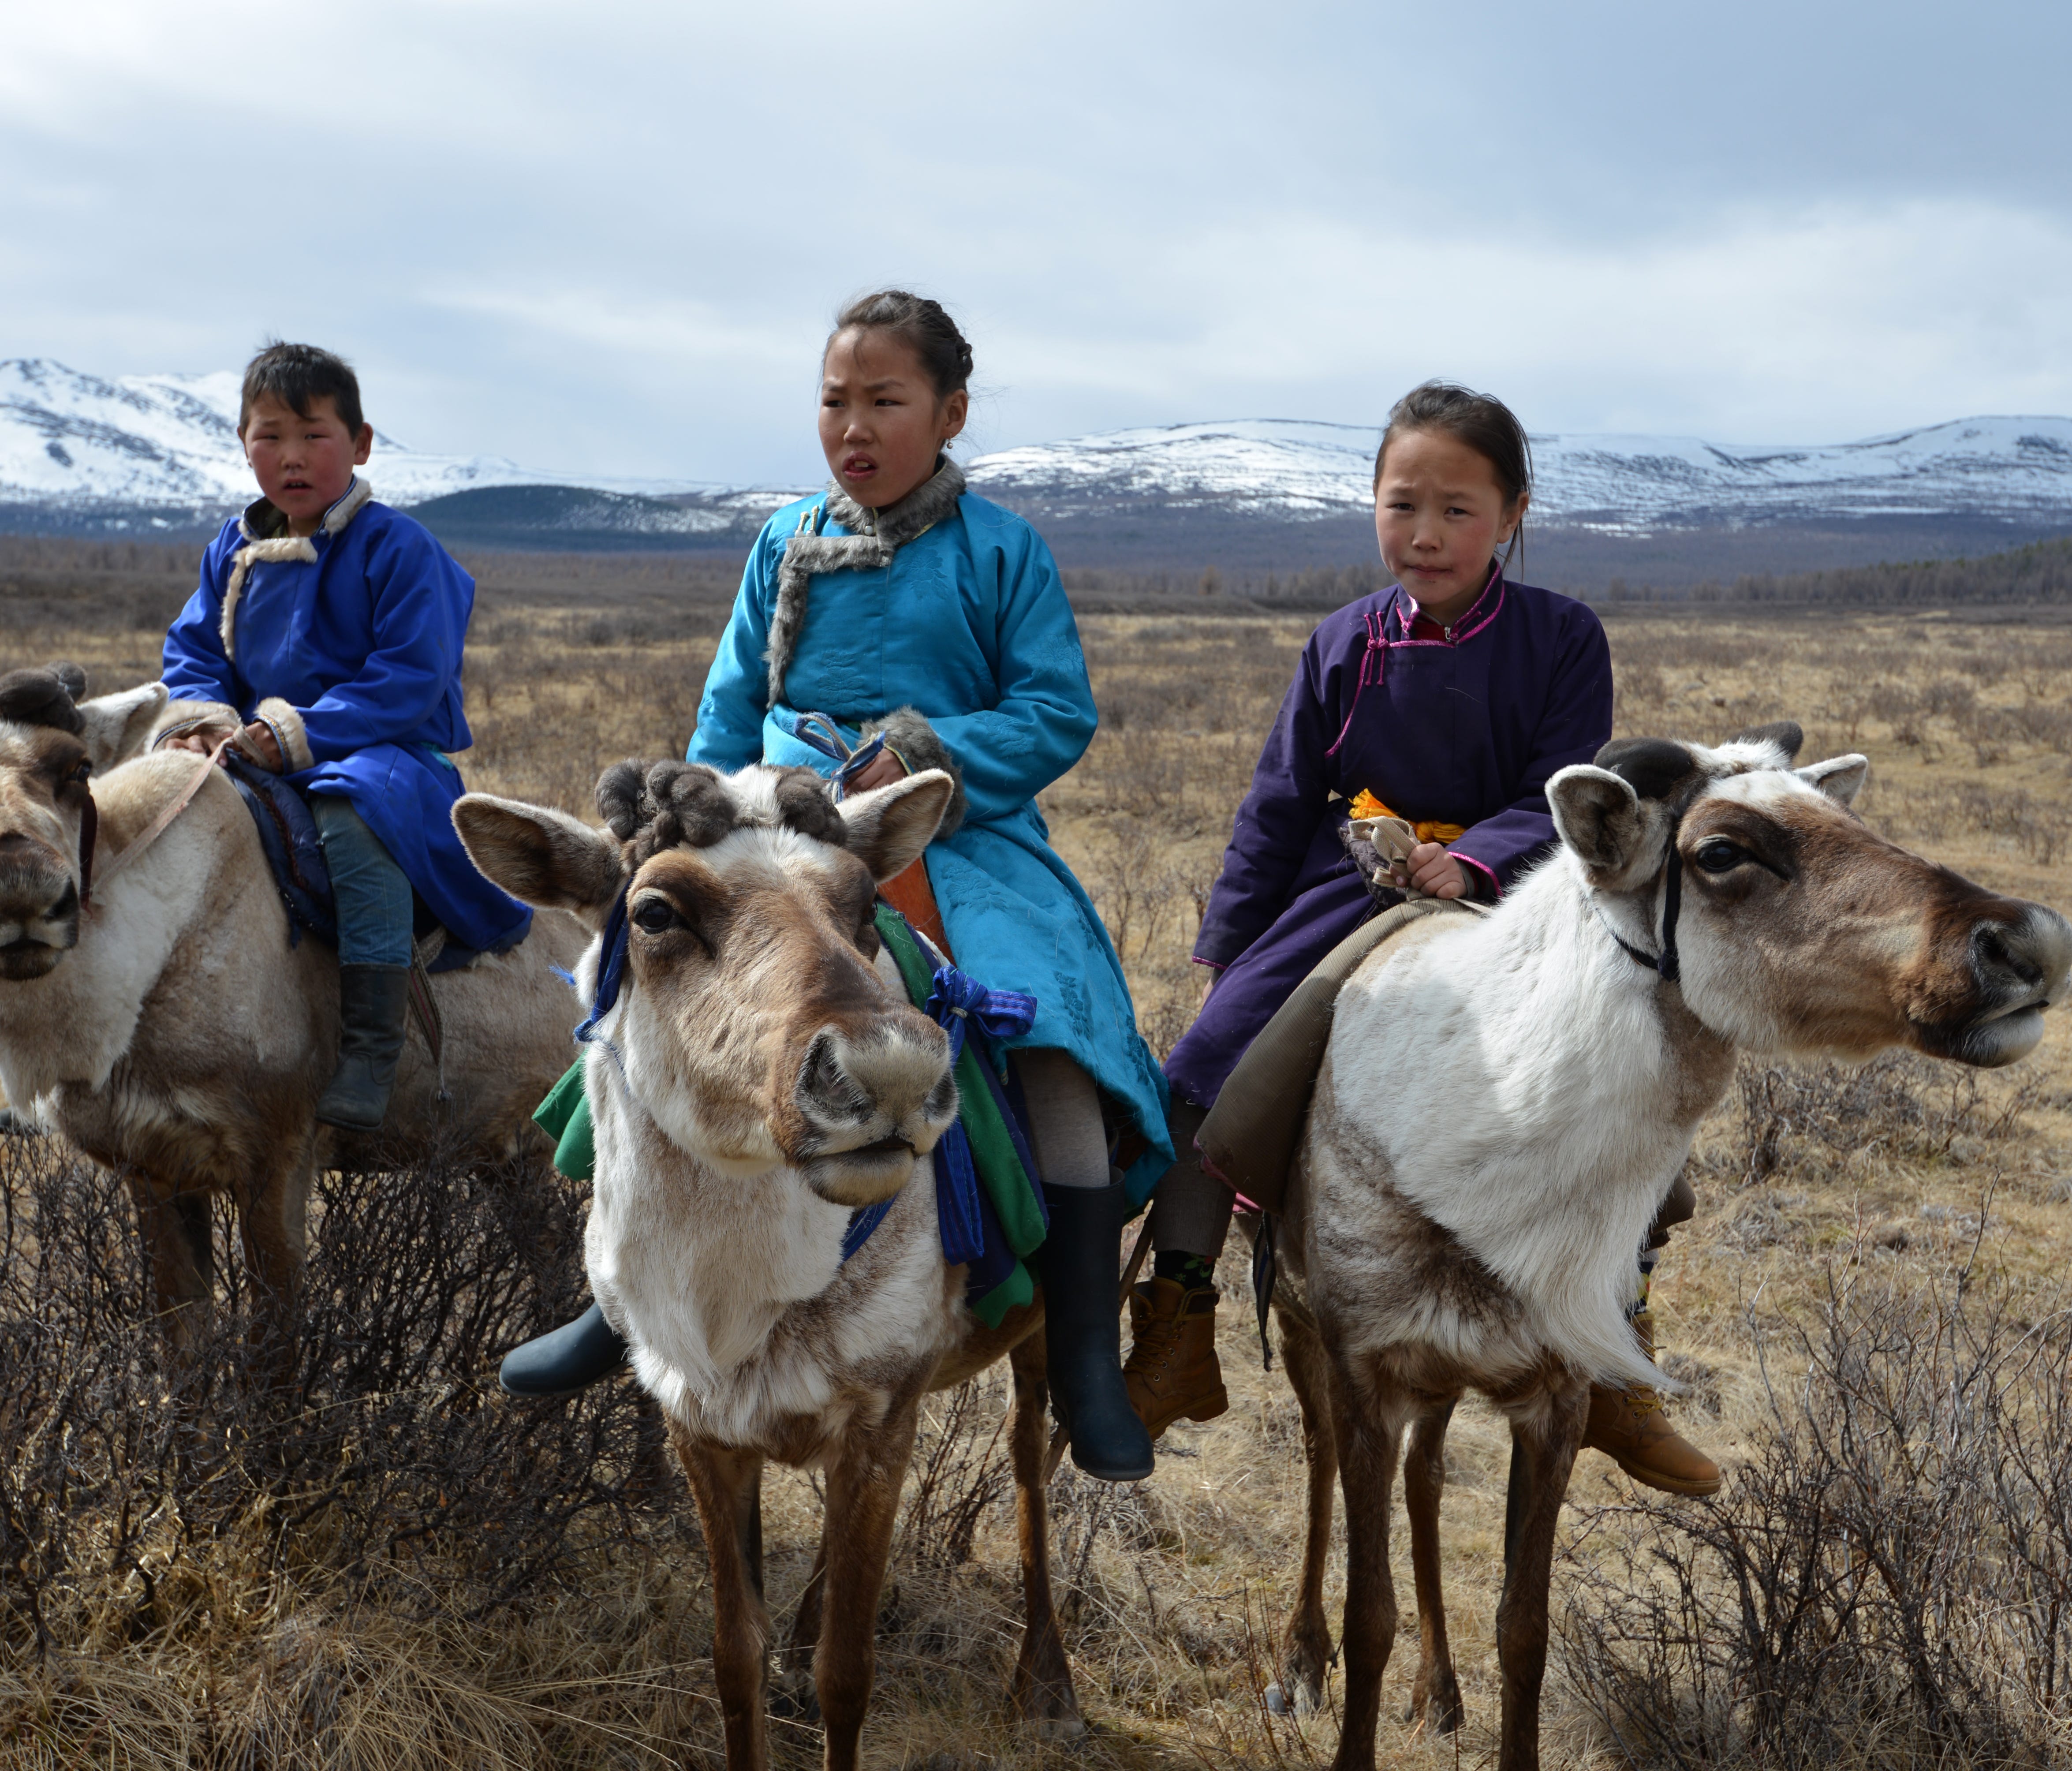 Three young members of the East Taiga community of Tsaatan reindeer herders show off their riding skills.